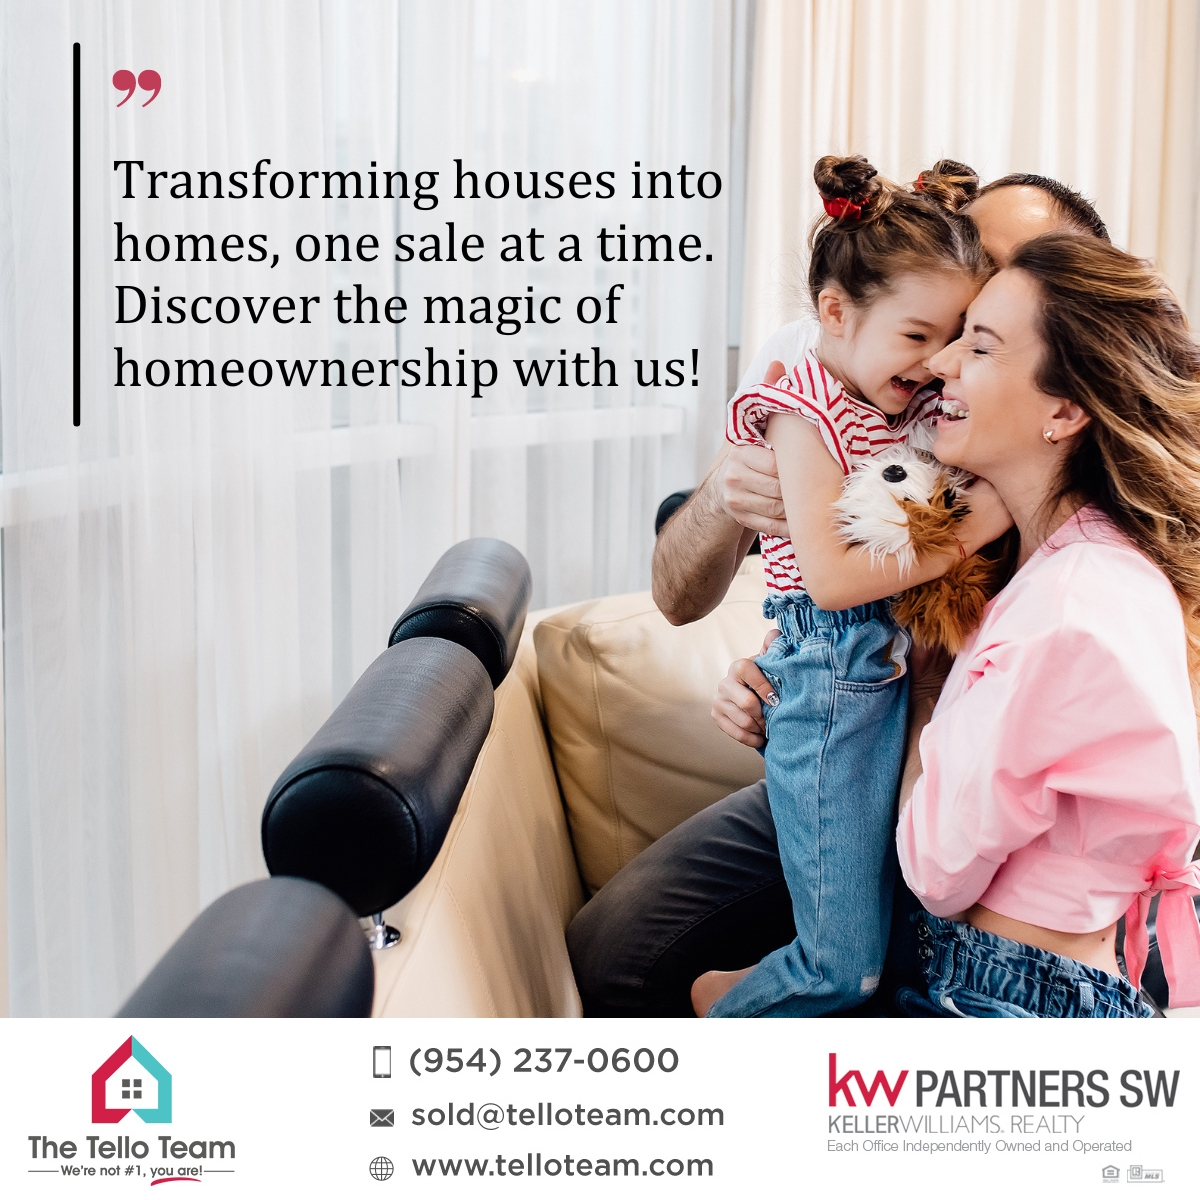 Discover the magic of homeownership with us!

Contact a realtor you can trust 📲+1 954-237-0600

#realestatebroker #realestatemiami #realestateflorida #floridarealtor #floridarealtors #floridarealestate #floridarealestateagent #floridarealestateagents #miamirealtor #miamirealtors